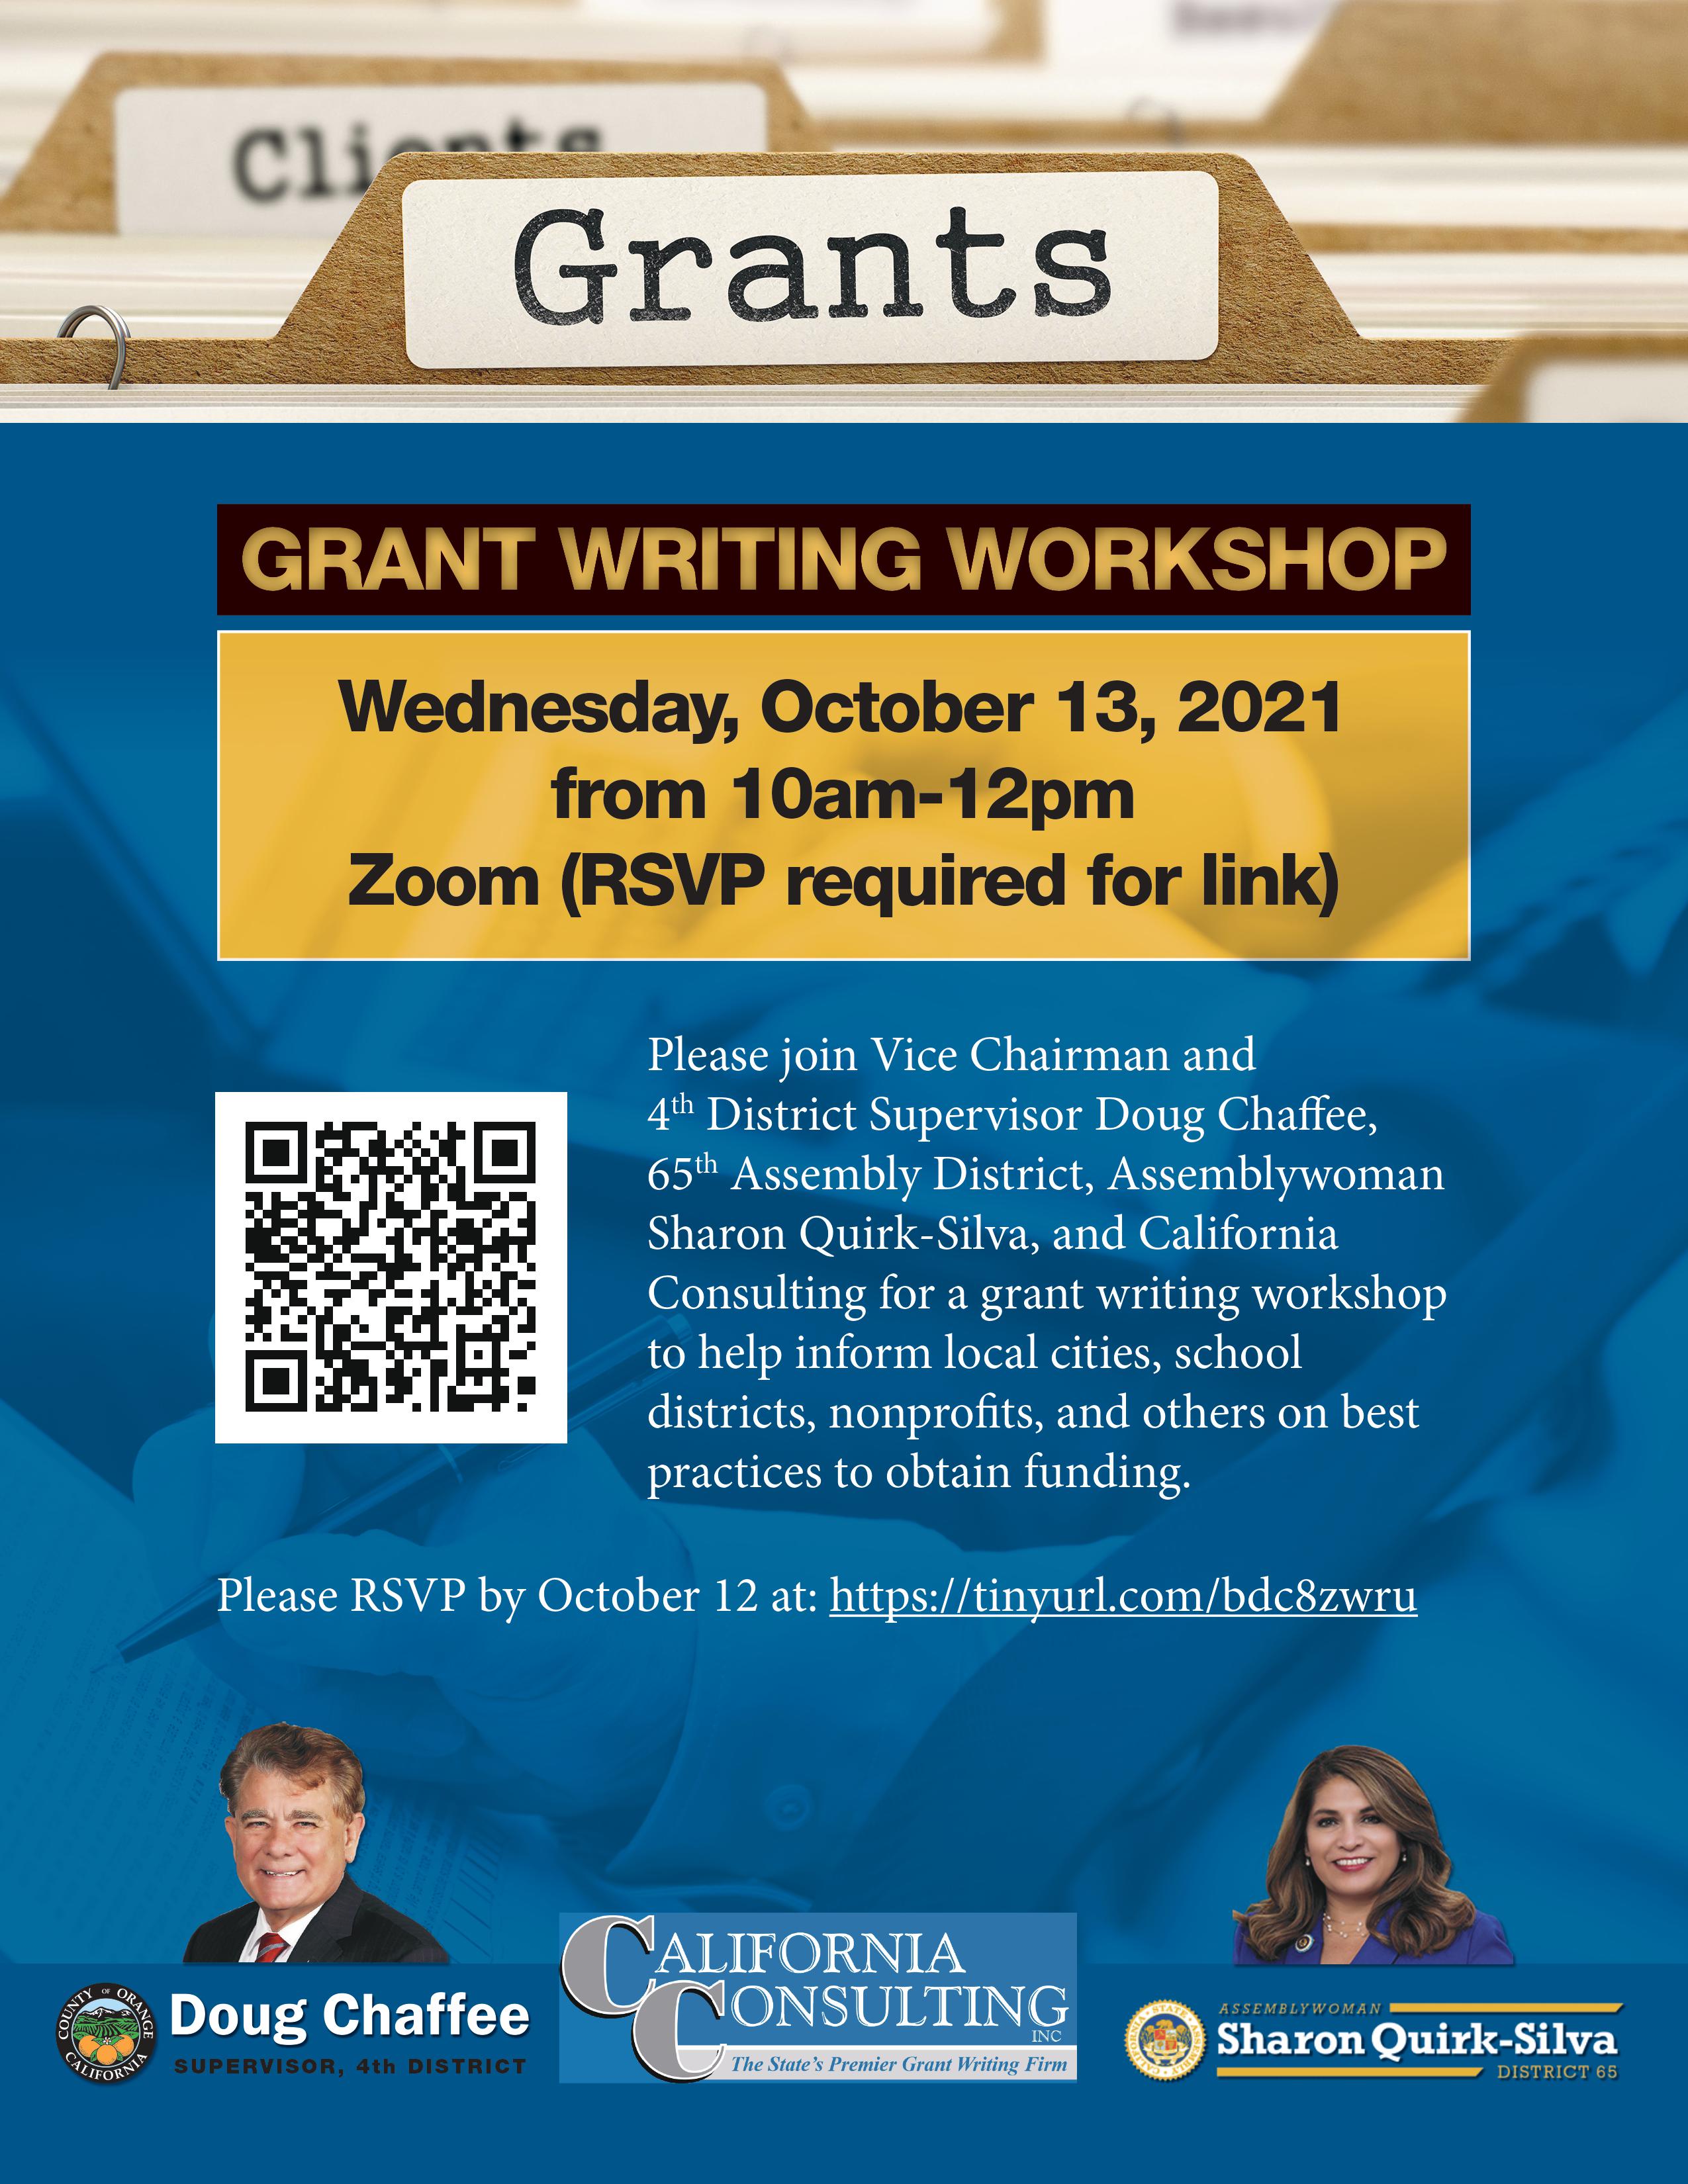 Come join us for our virtual Third Annual Grants Workshop on Wednesday, October 13 from 10 AM - 12 PM.